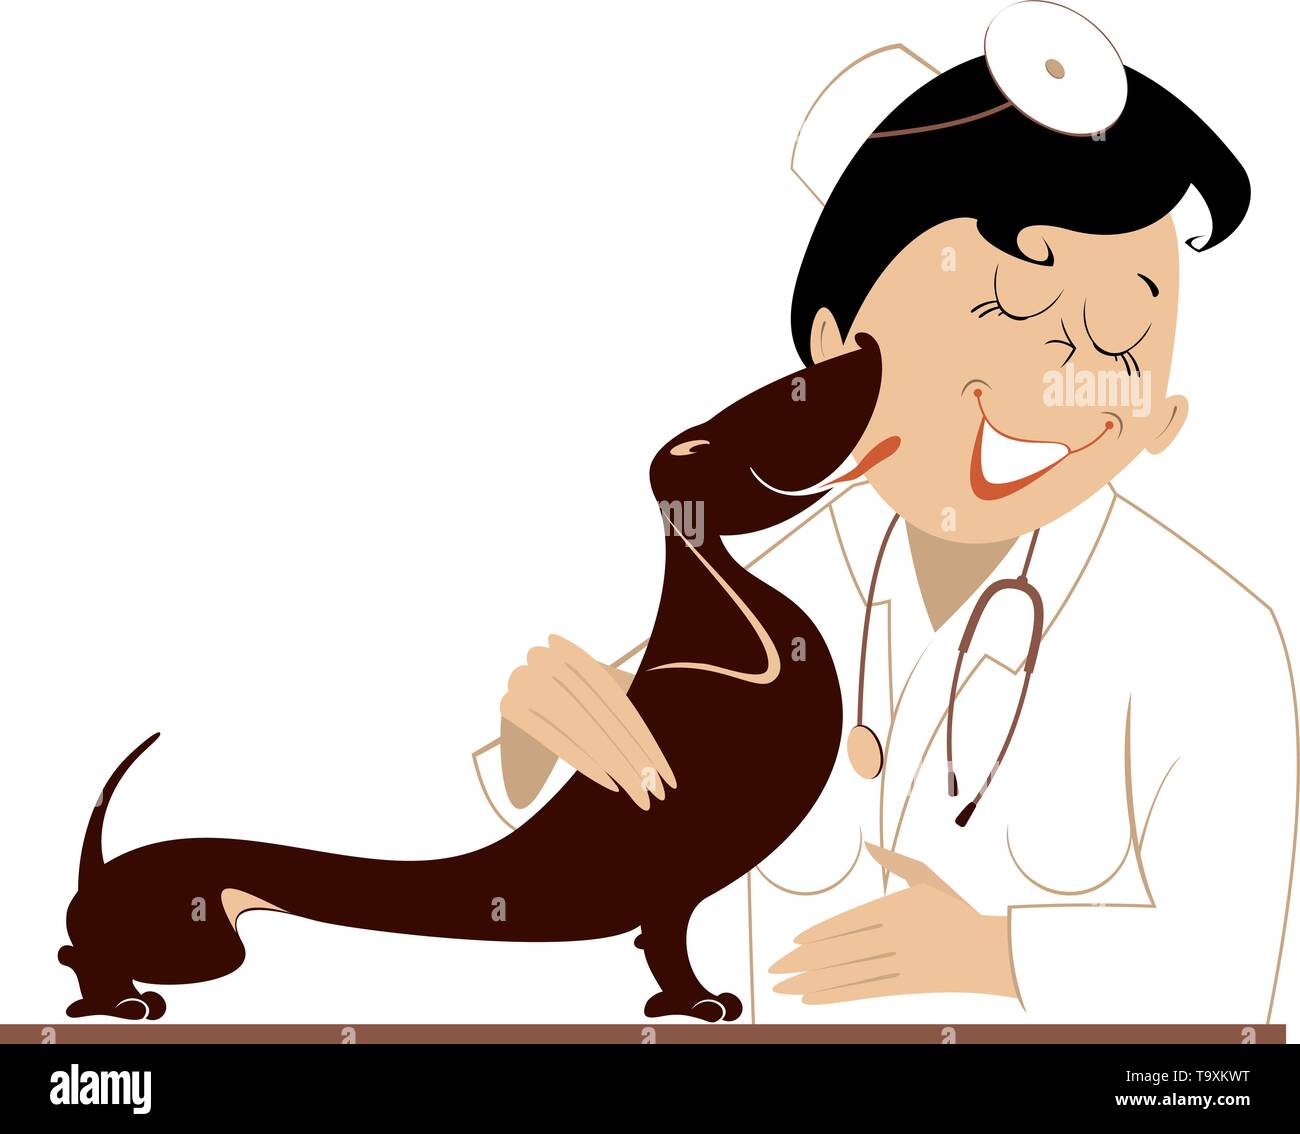 Veterinarian woman examines a dog isolated illustration. Kind veterinarian woman is being licked by the dog illustration Stock Vector